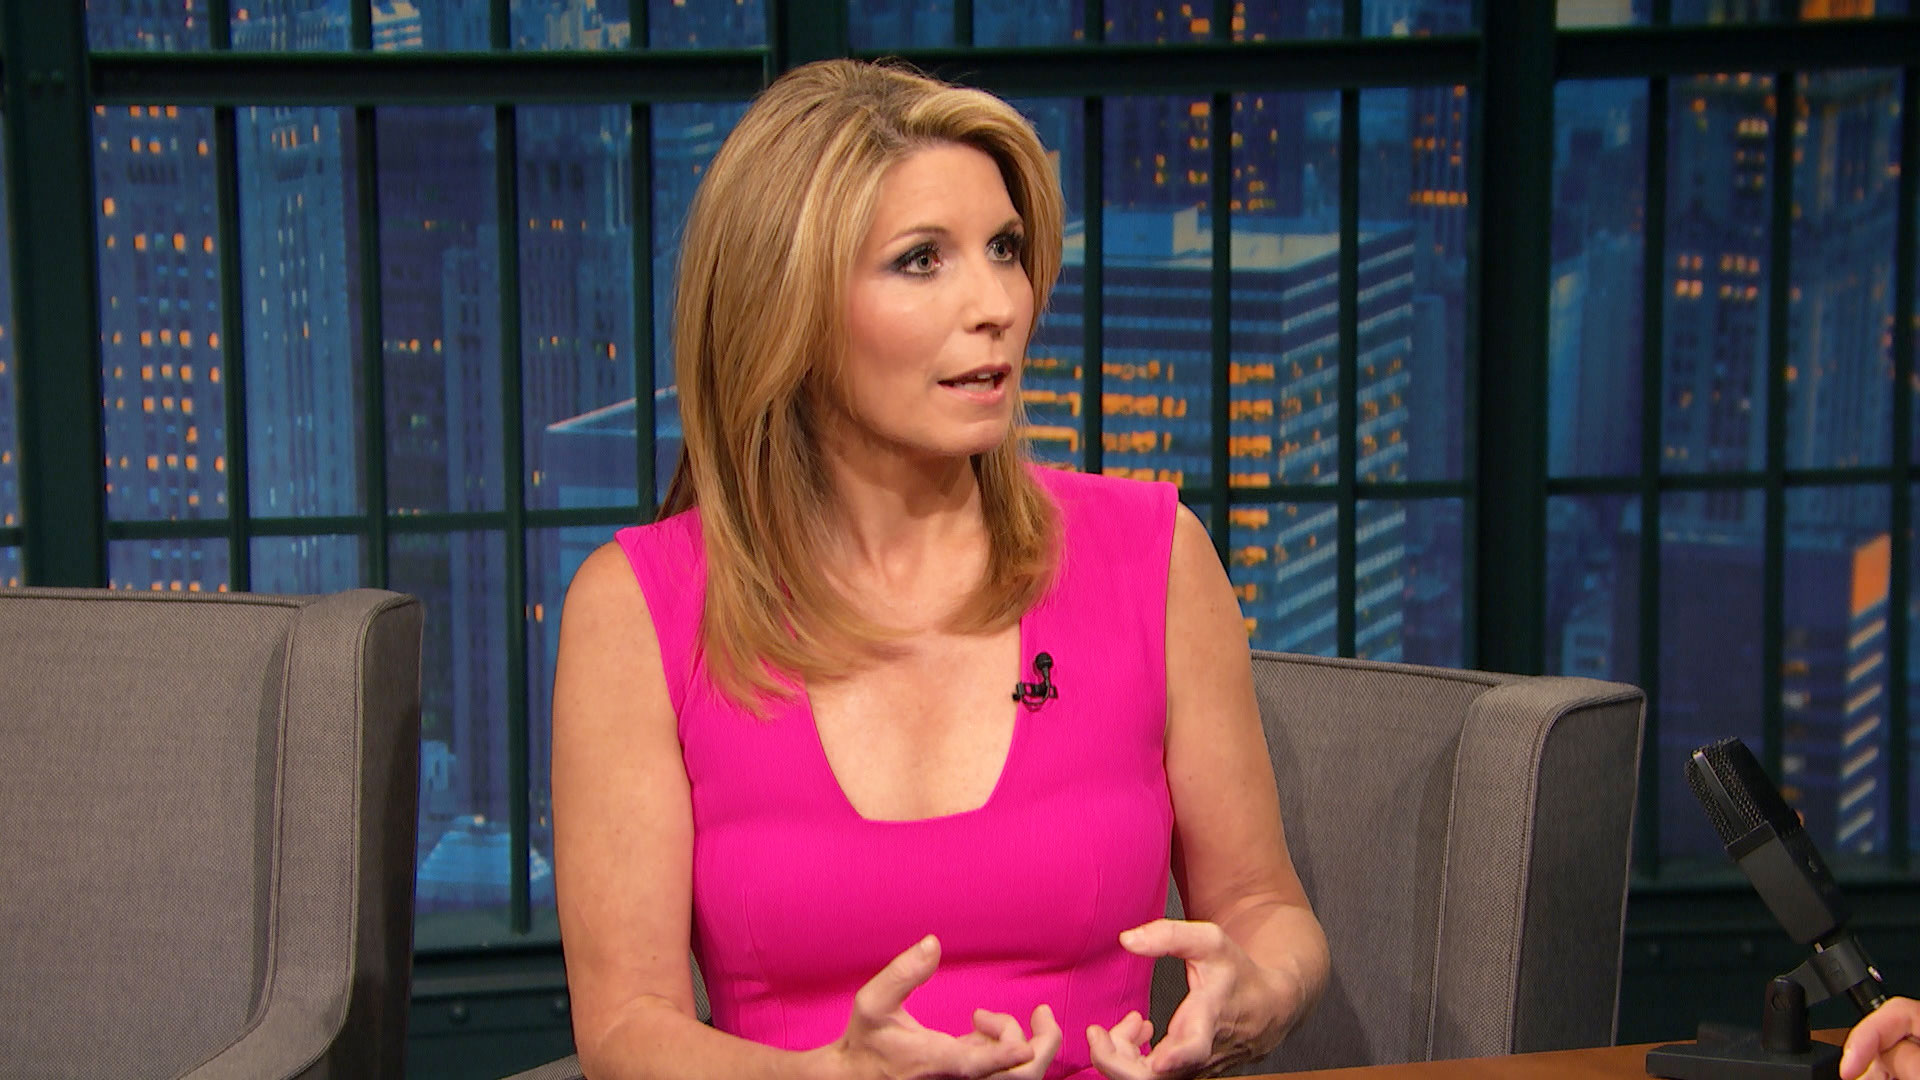 Watch Late Night with Seth Meyers Interview: Nicolle Wallace on Being an An...